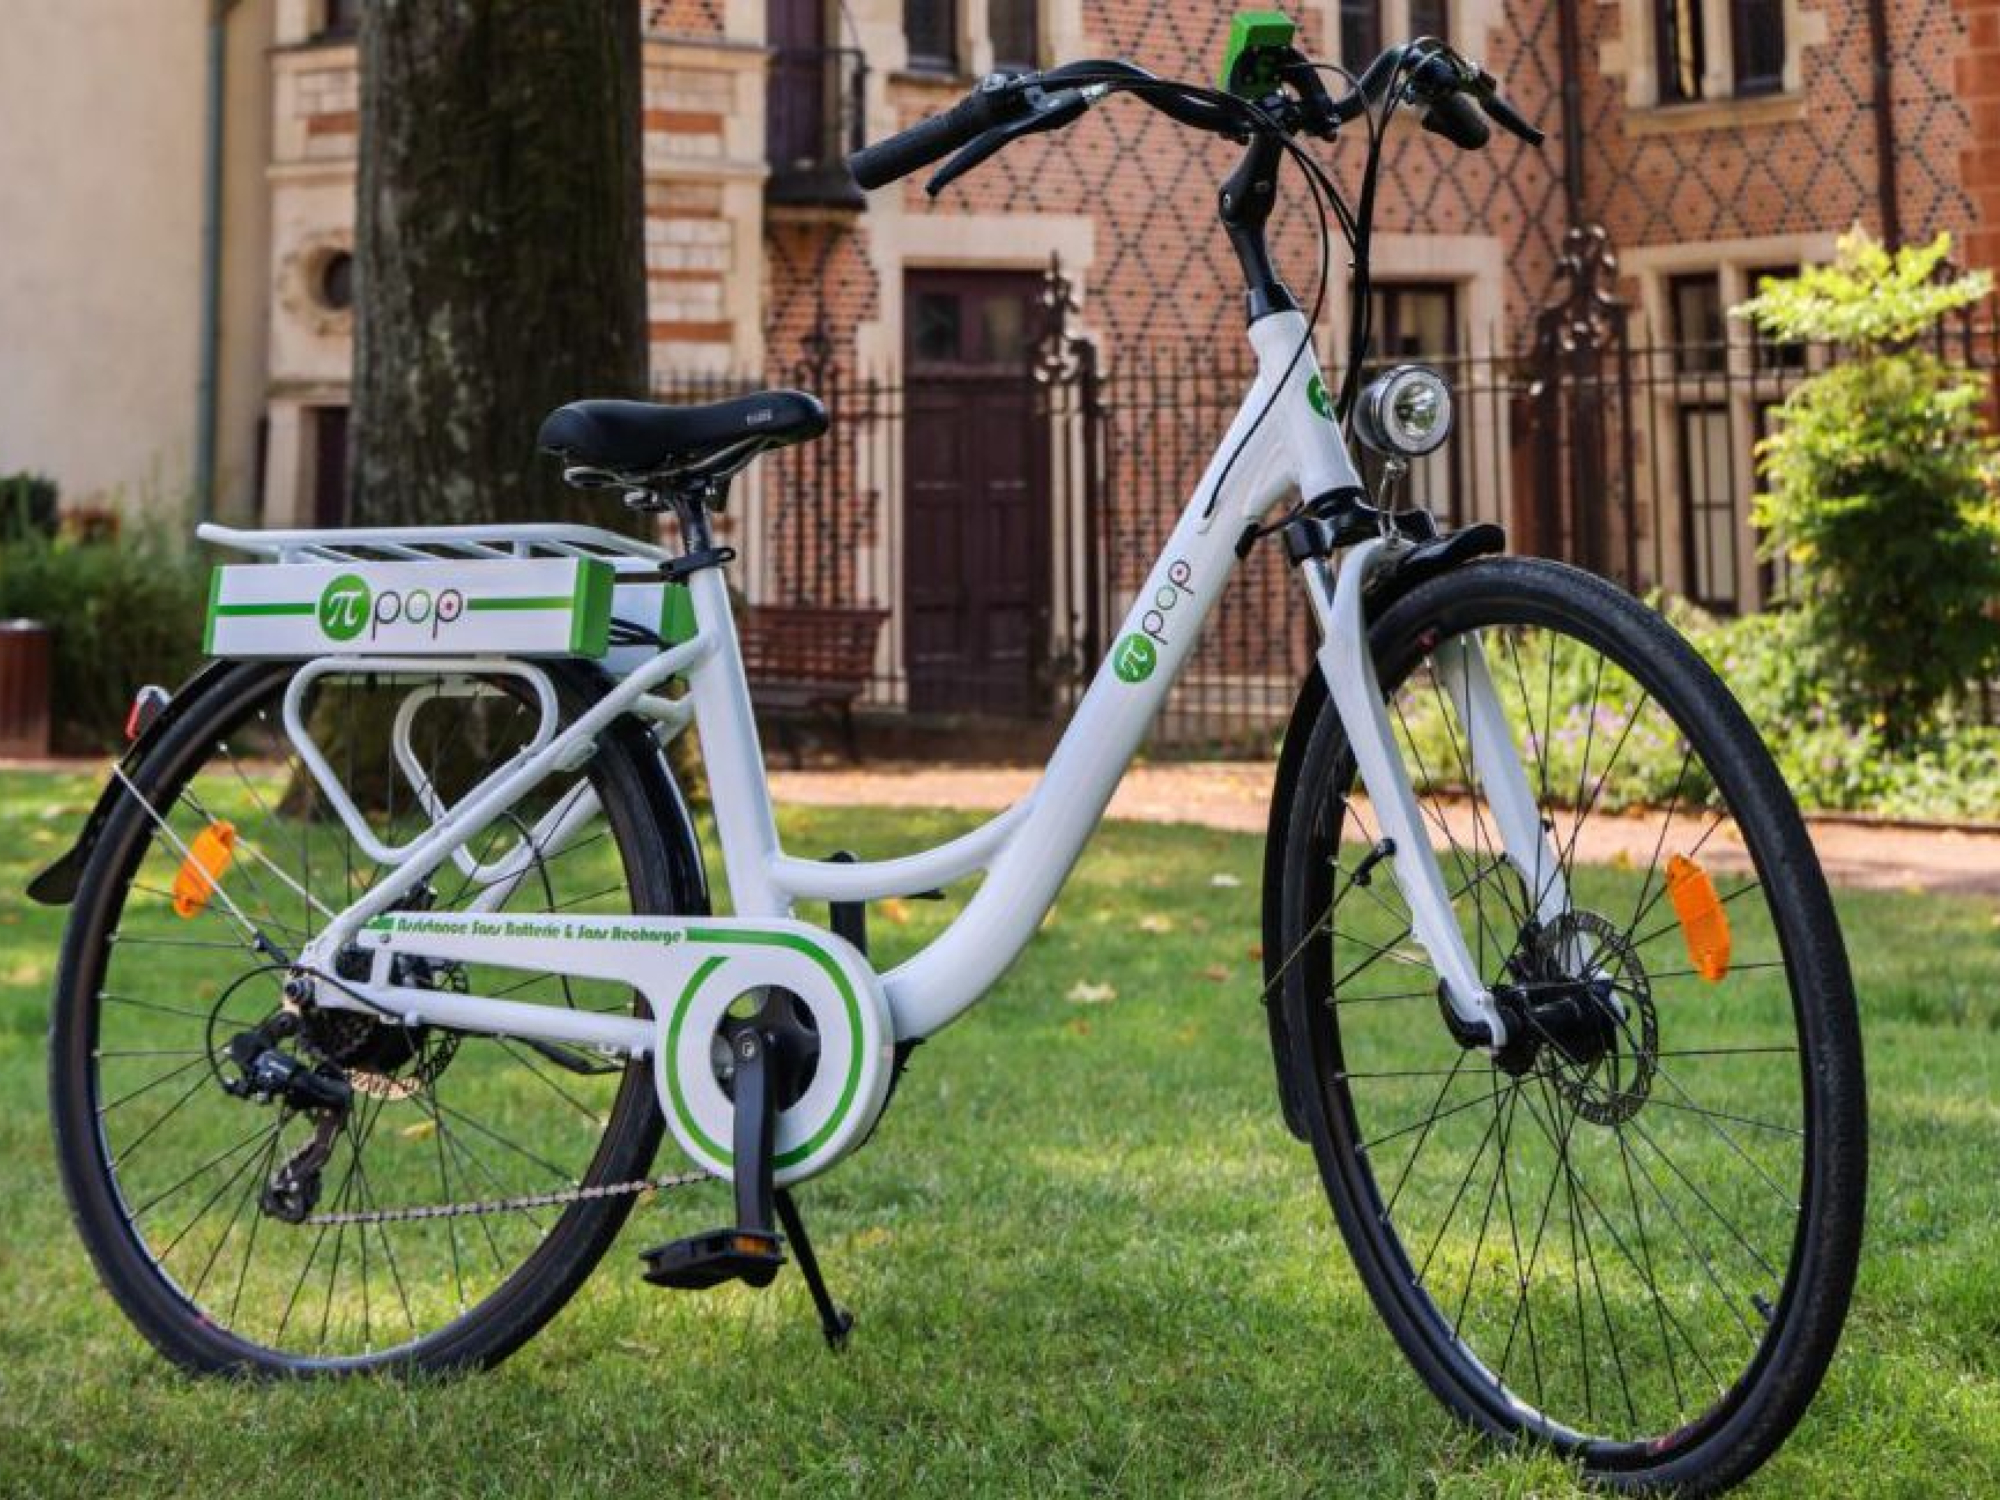 Meet the Pi-Pop, the electric bike you never need to charge